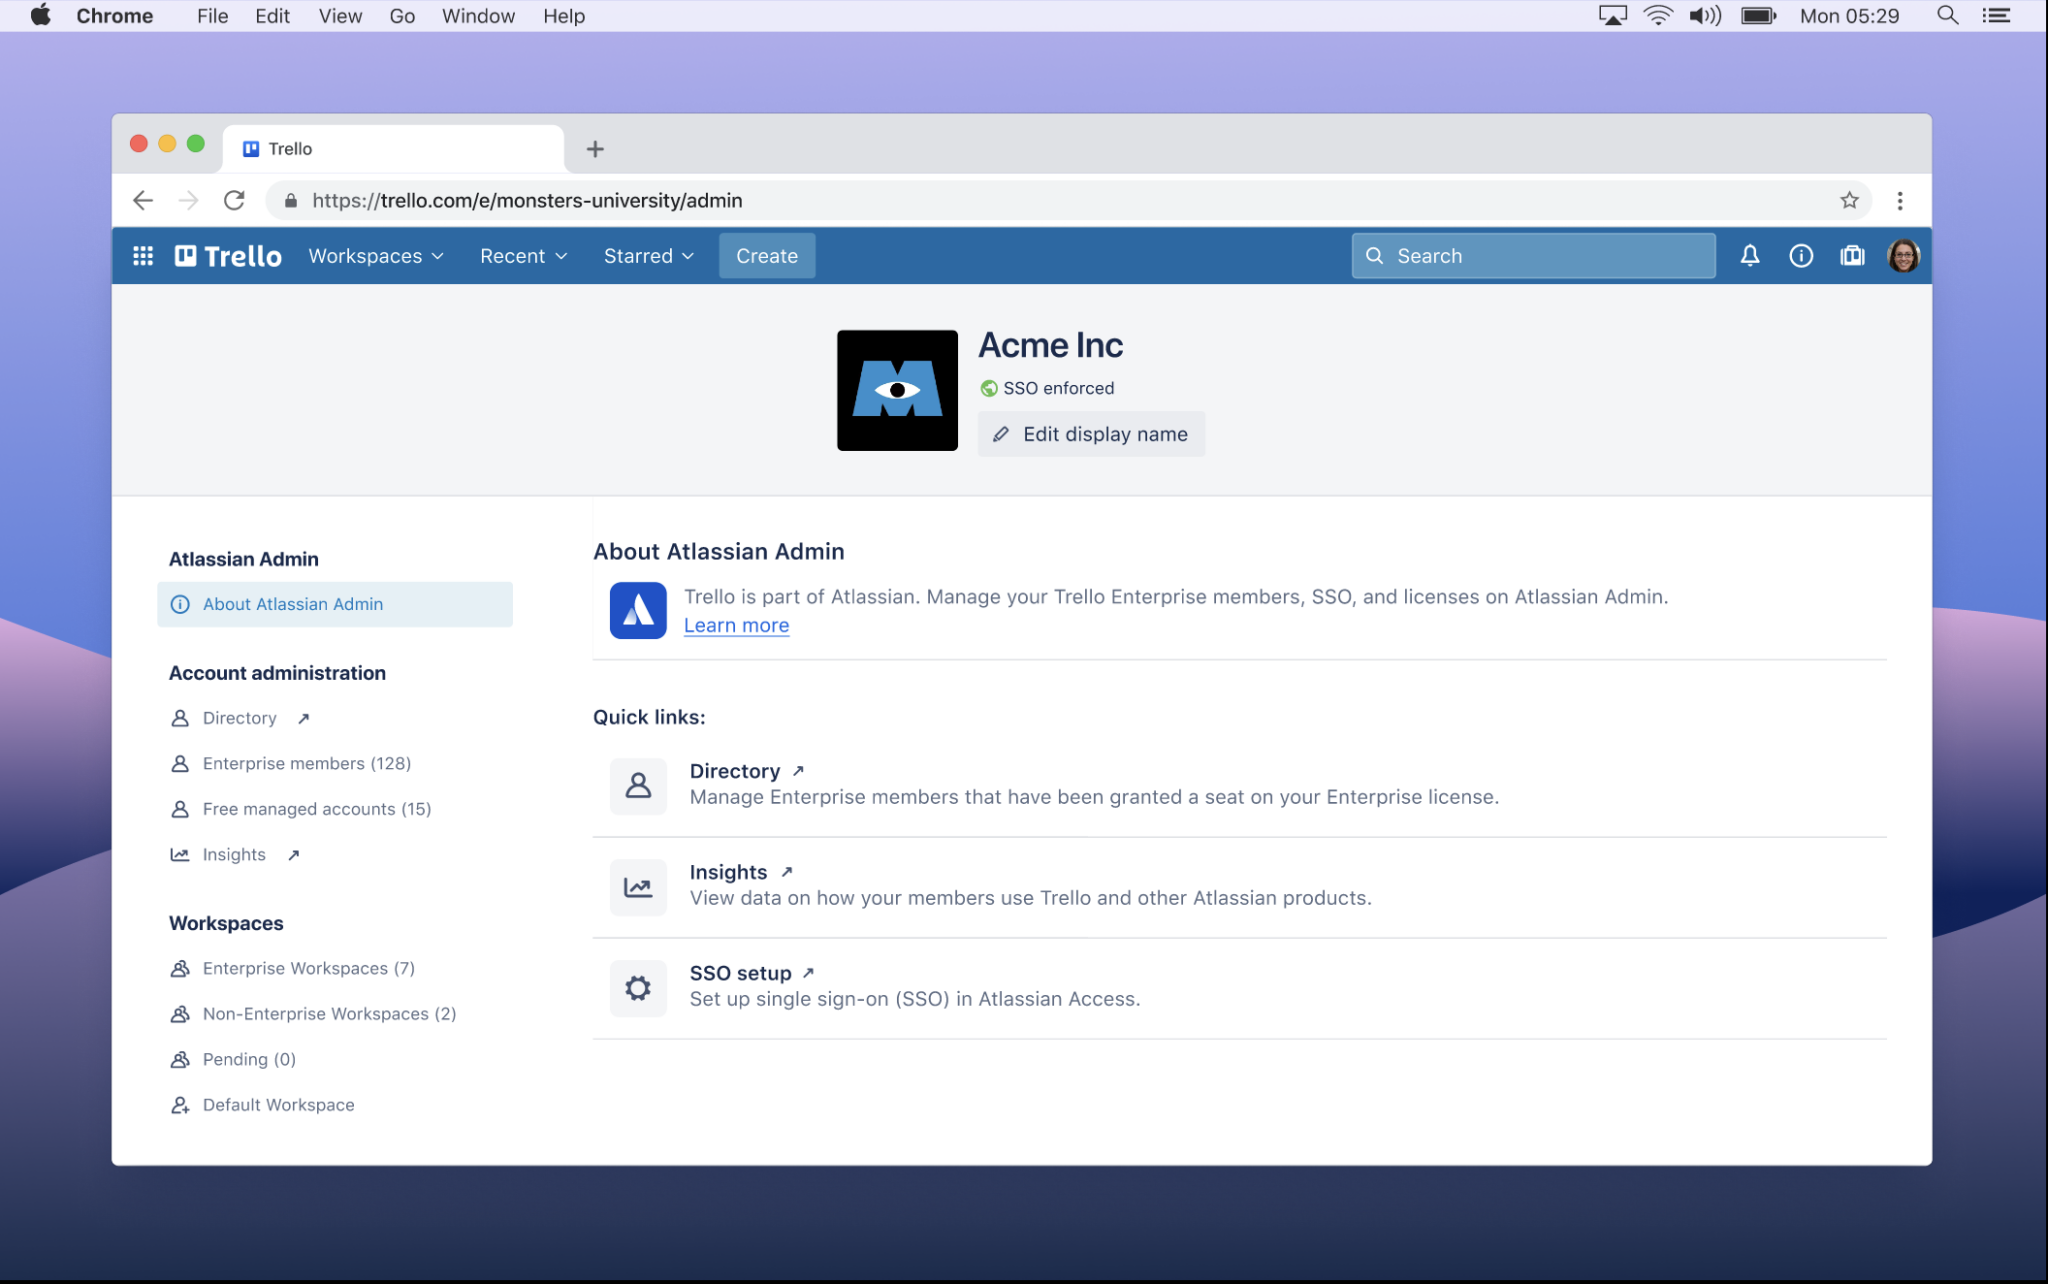 Trello admins can now navigate to the Atlassian Administration hub more quickly in their Trello Enterprise Admin Dashboard via the “About Atlassian Admin” page